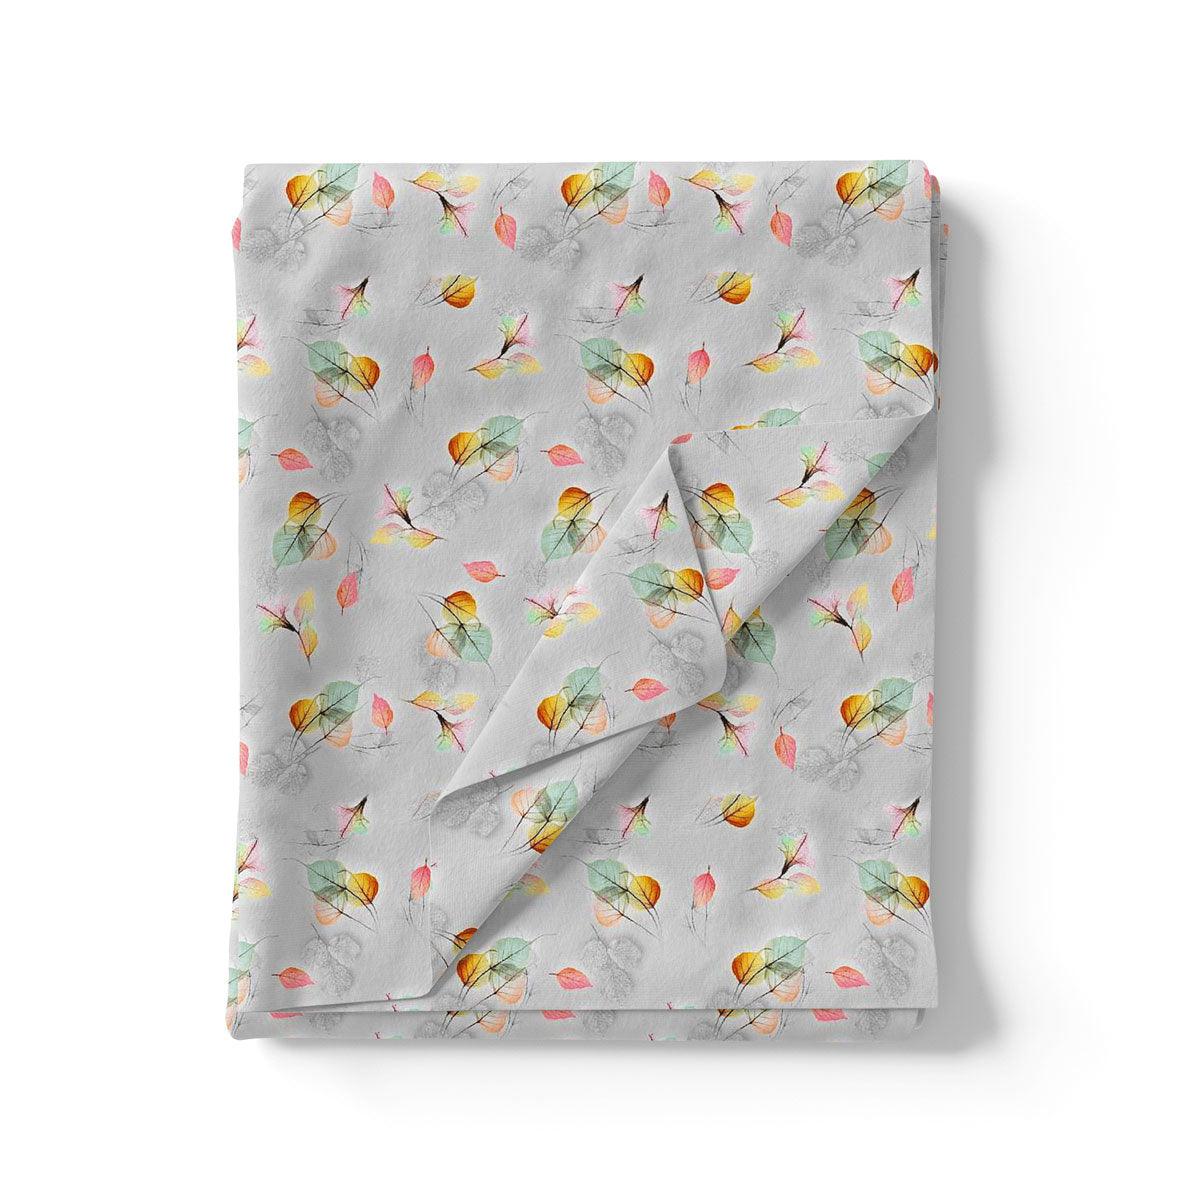 Gray Leaves Weightless Printed Fabric - FAB VOGUE Studio®